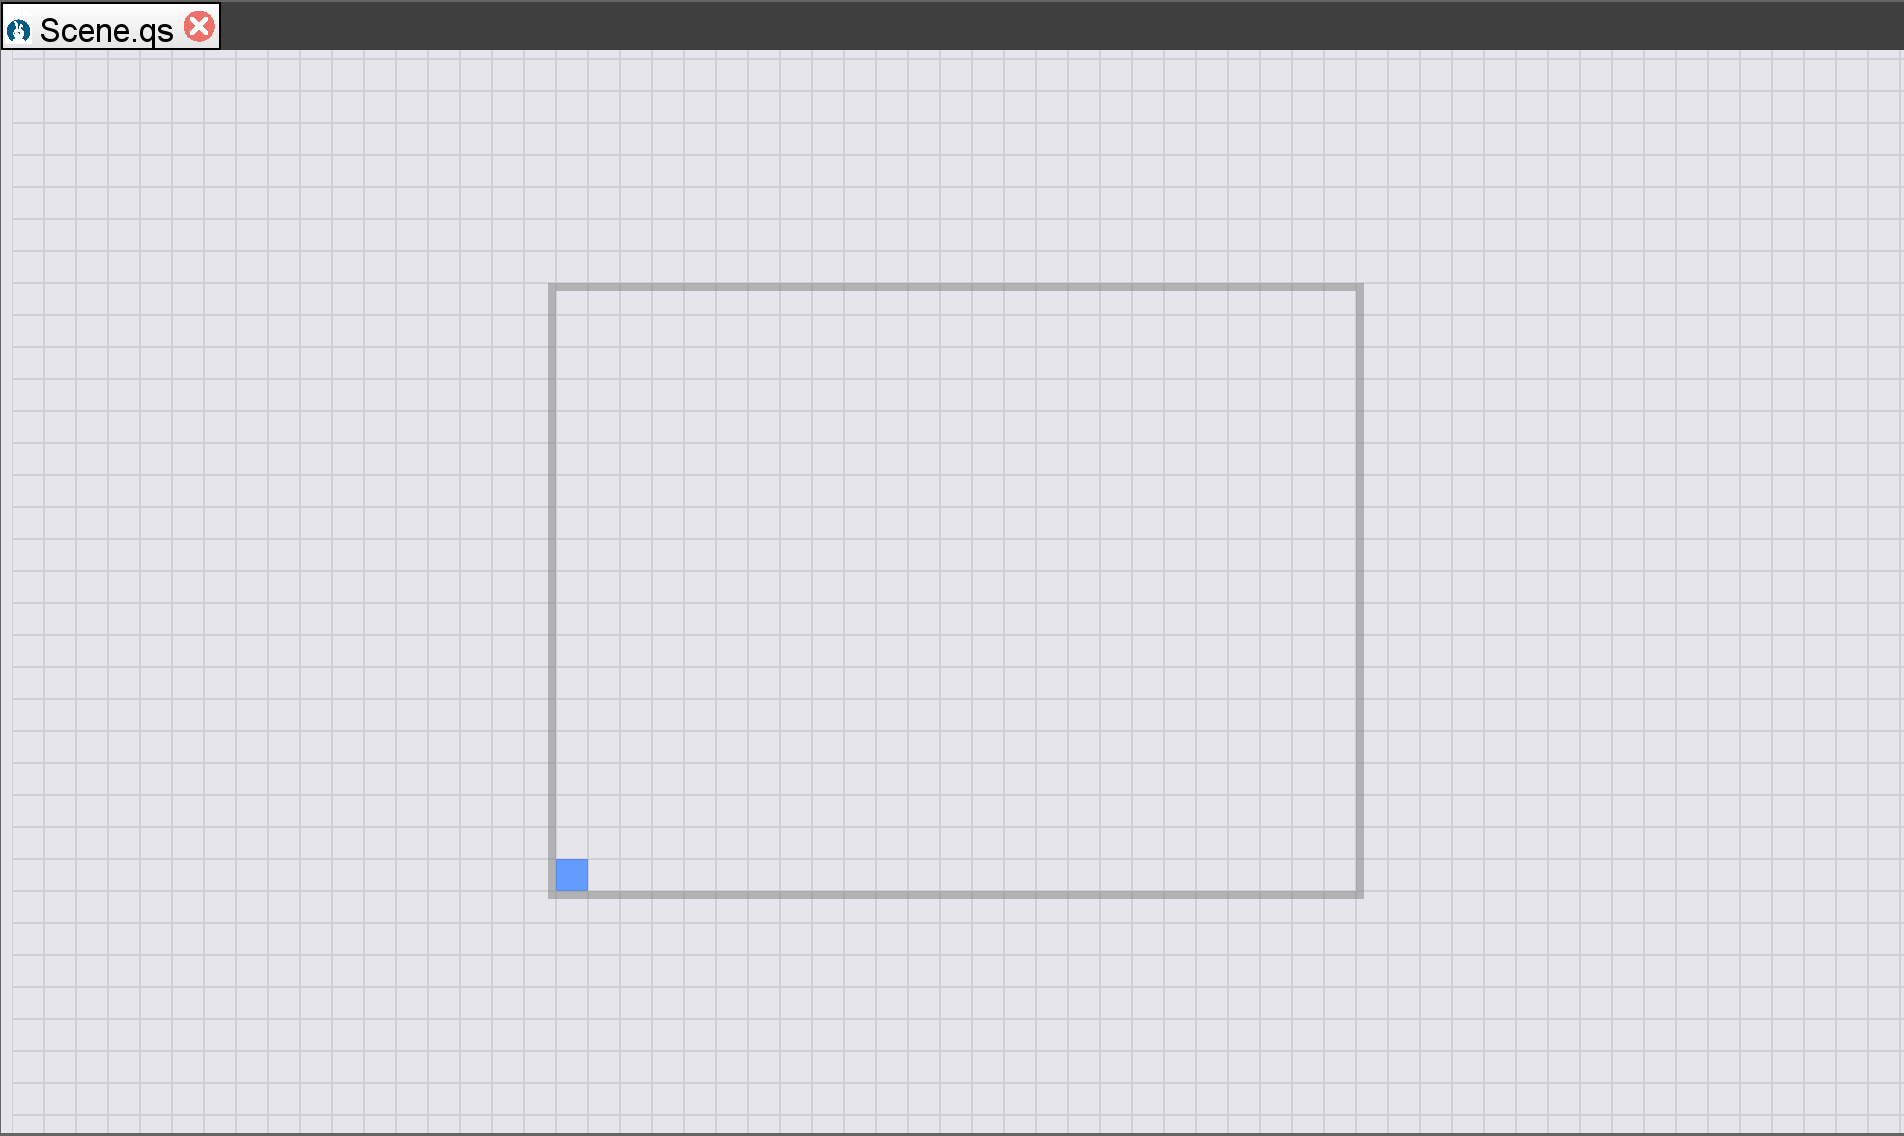 This image is a grid with a single water tile. By default, the tile is placed in the camera's visible plane, which is (0, 0).